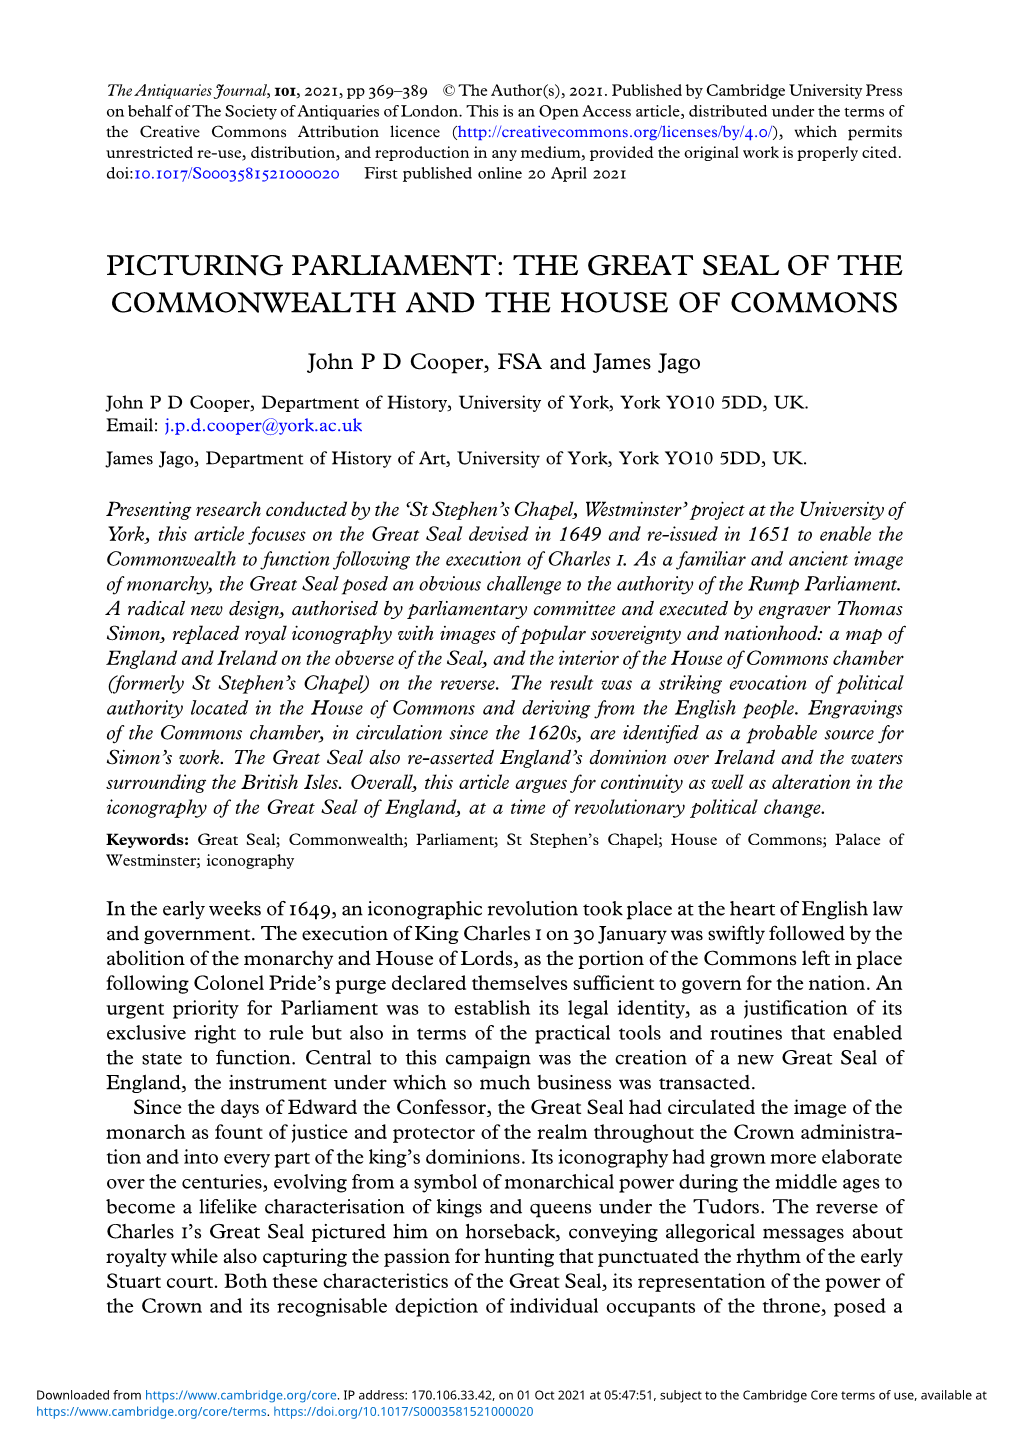 Picturing Parliament: the Great Seal of the Commonwealth and the House of Commons